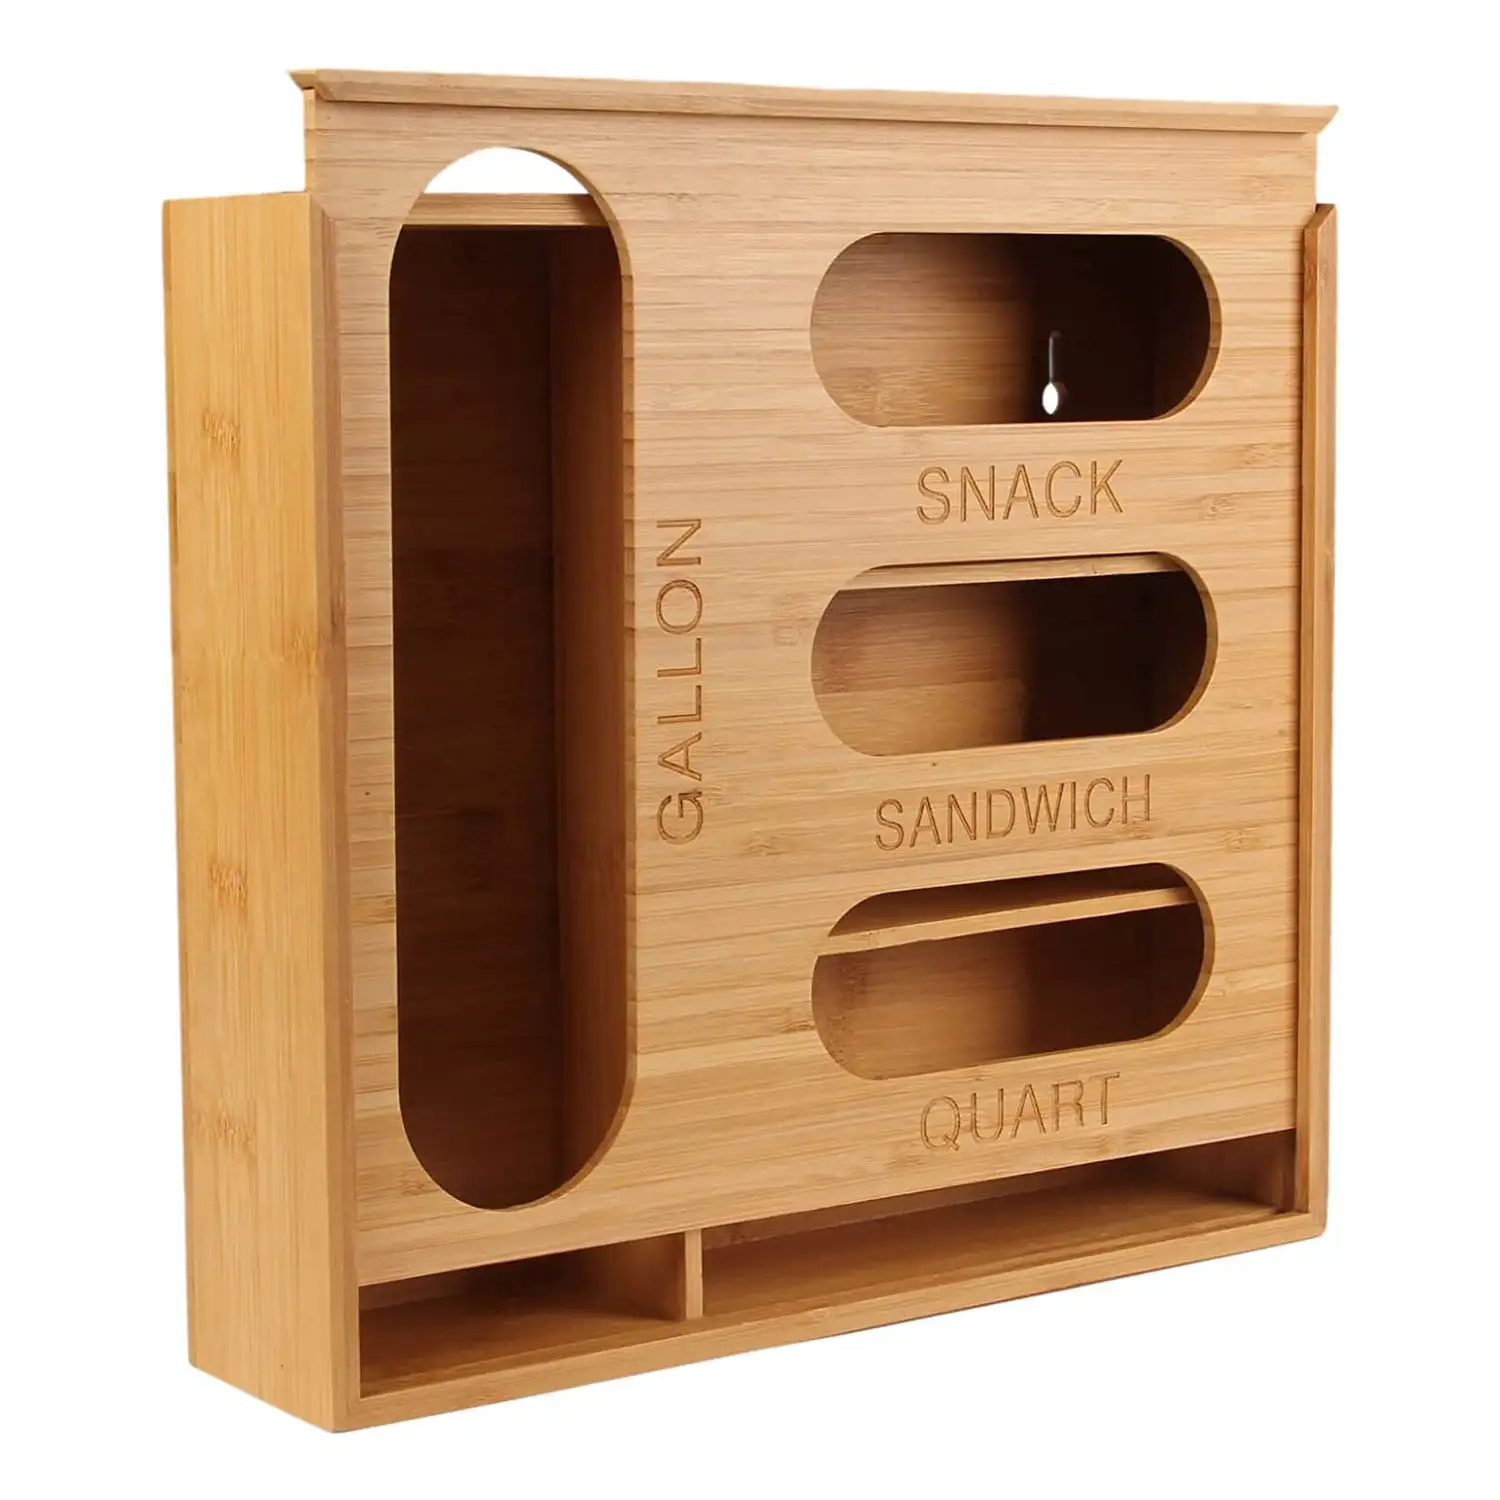 Bamboo Ziplock Bag Storage Organizer With Lid Cabinet Drawer Organization Compatible With Gallon Quart Sandwich Snack